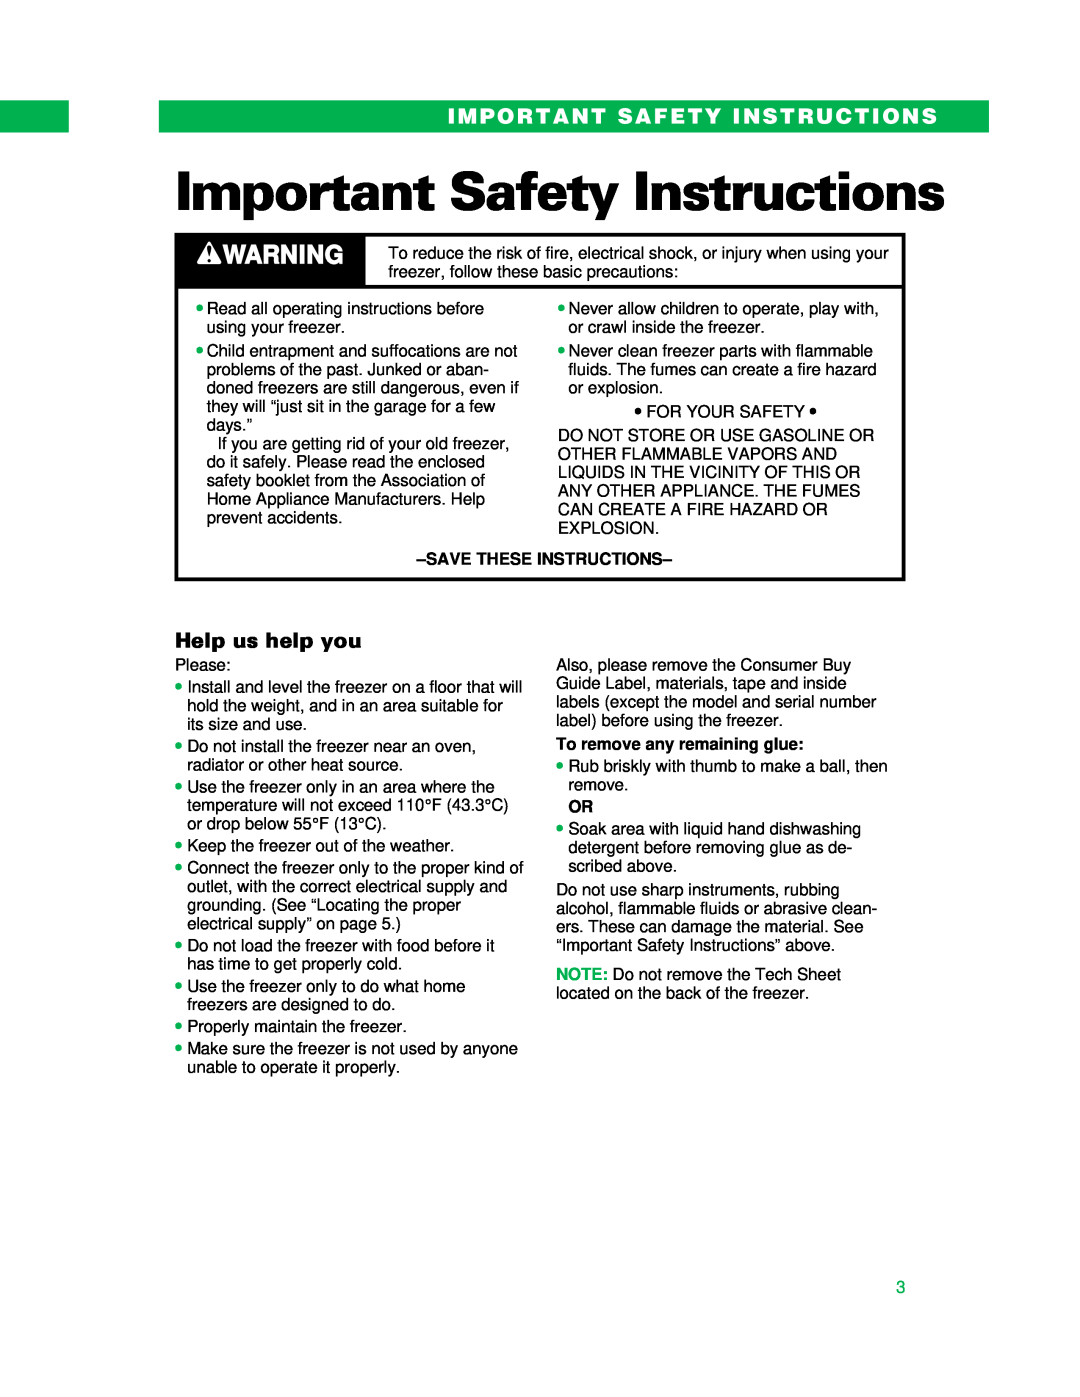 Whirlpool UPRIGHT FREEZER Important Safety Instructions, Help us help you, Savethese Instructions 